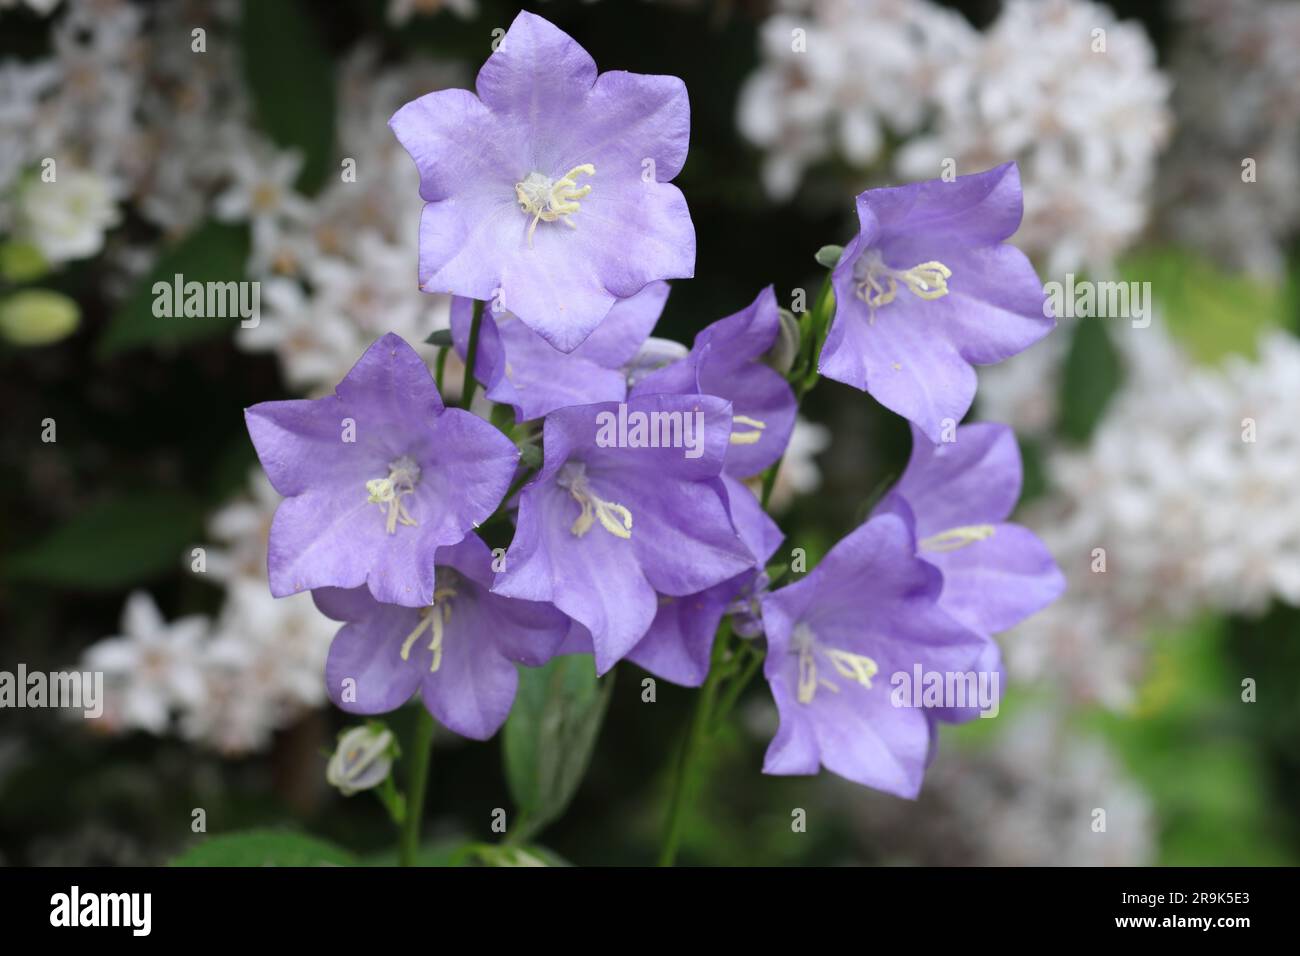 Close-up of beautiful purple-blue Campanula persicifolia flowers in front of a flowering shrub of a deutzia Stock Photo